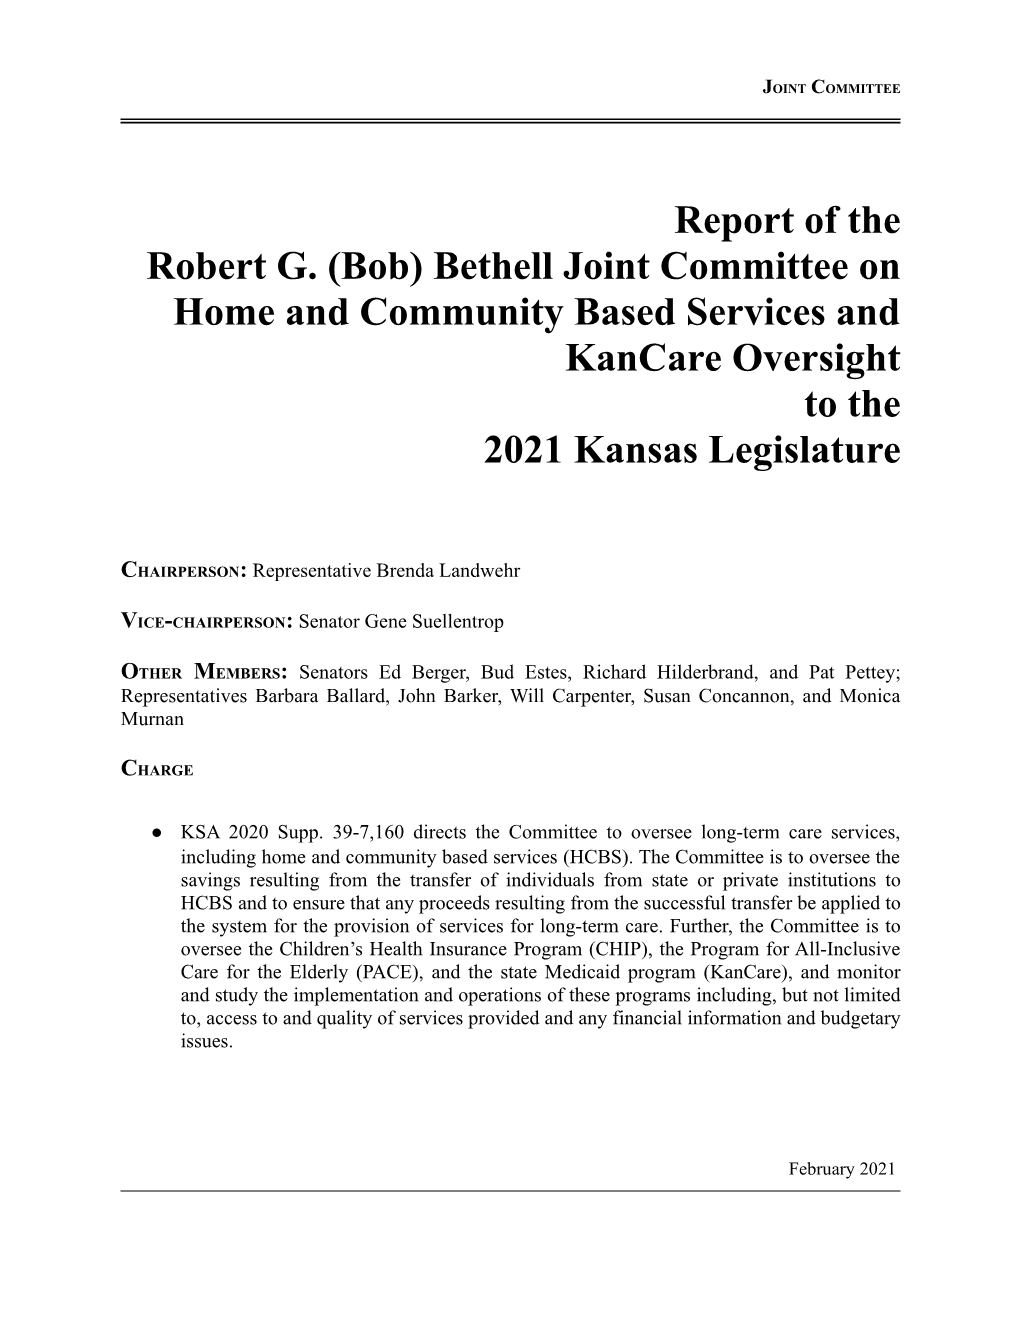 Bob Bethell Joint Committee on Home and Community Based Services